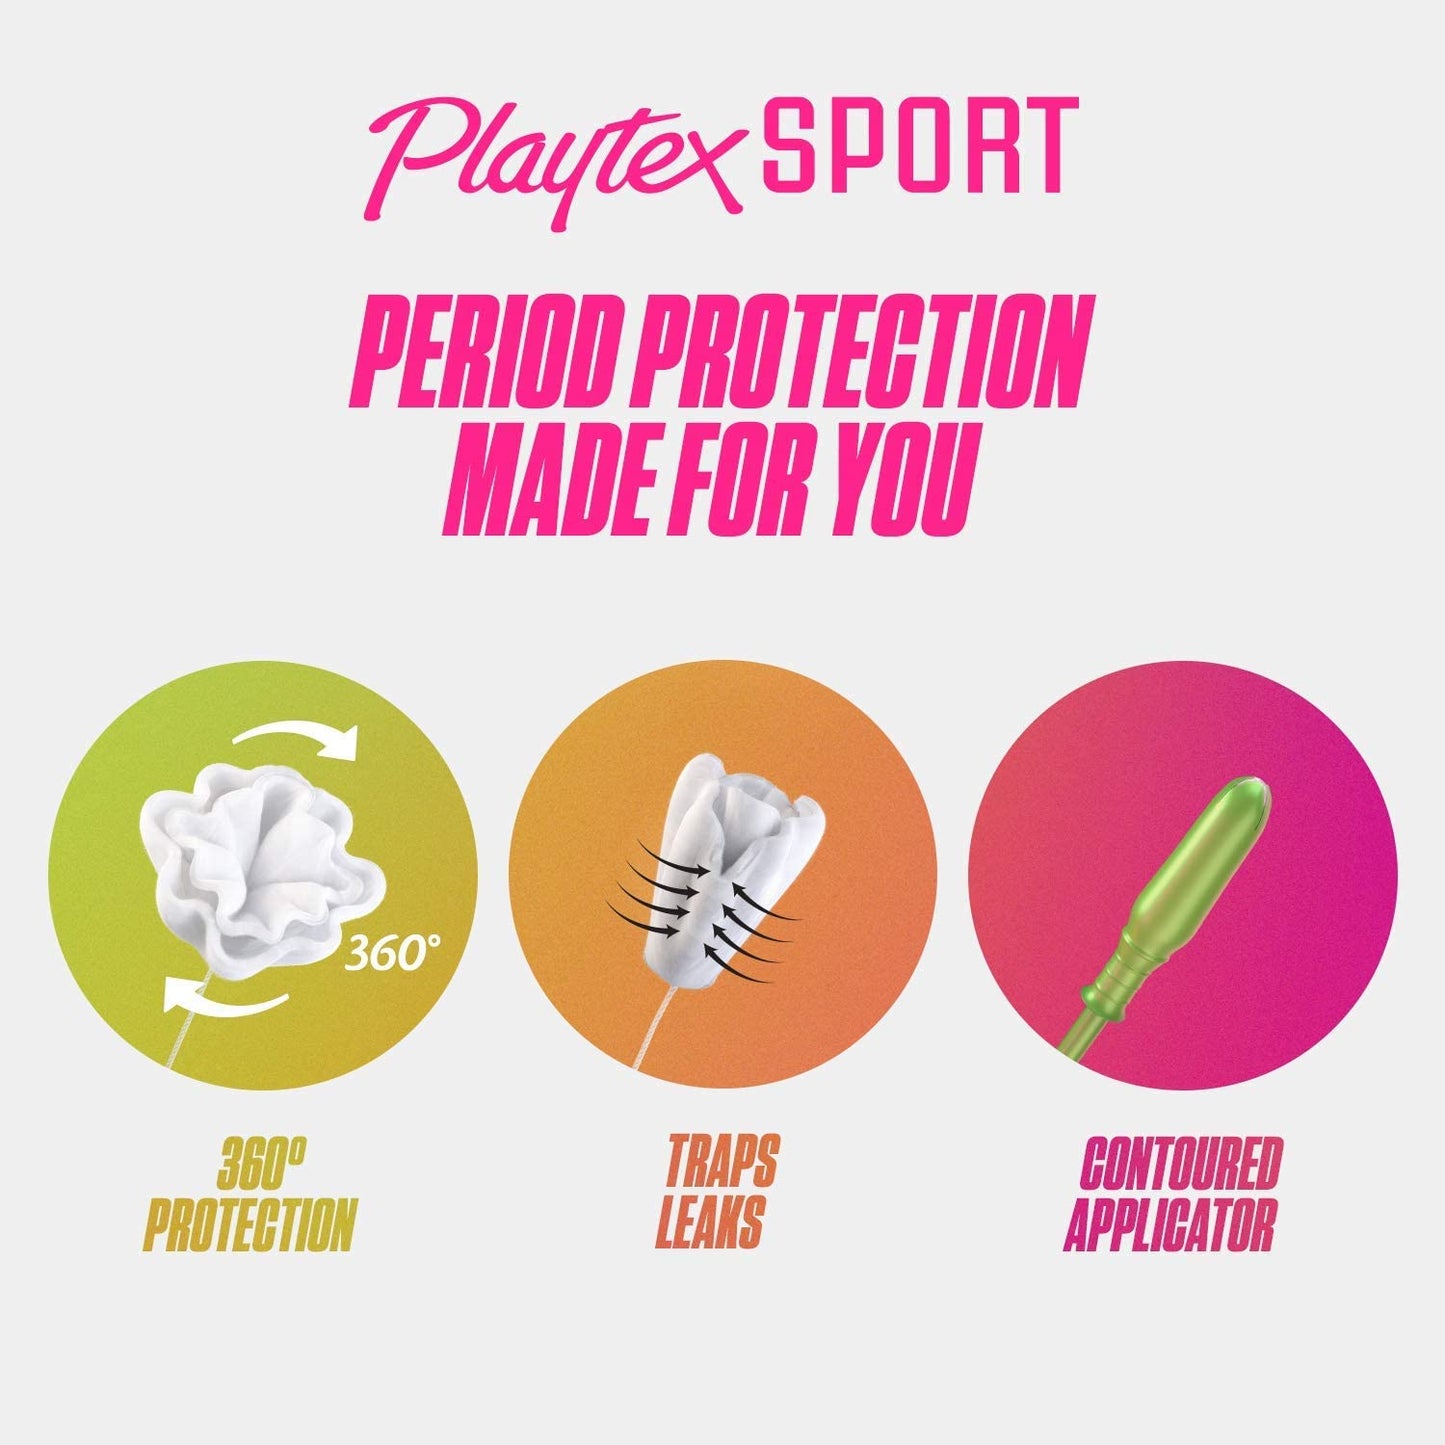 Playtex Sport Tampons Multipack Regular and Super Absorbency, Unscented 48 Tampons